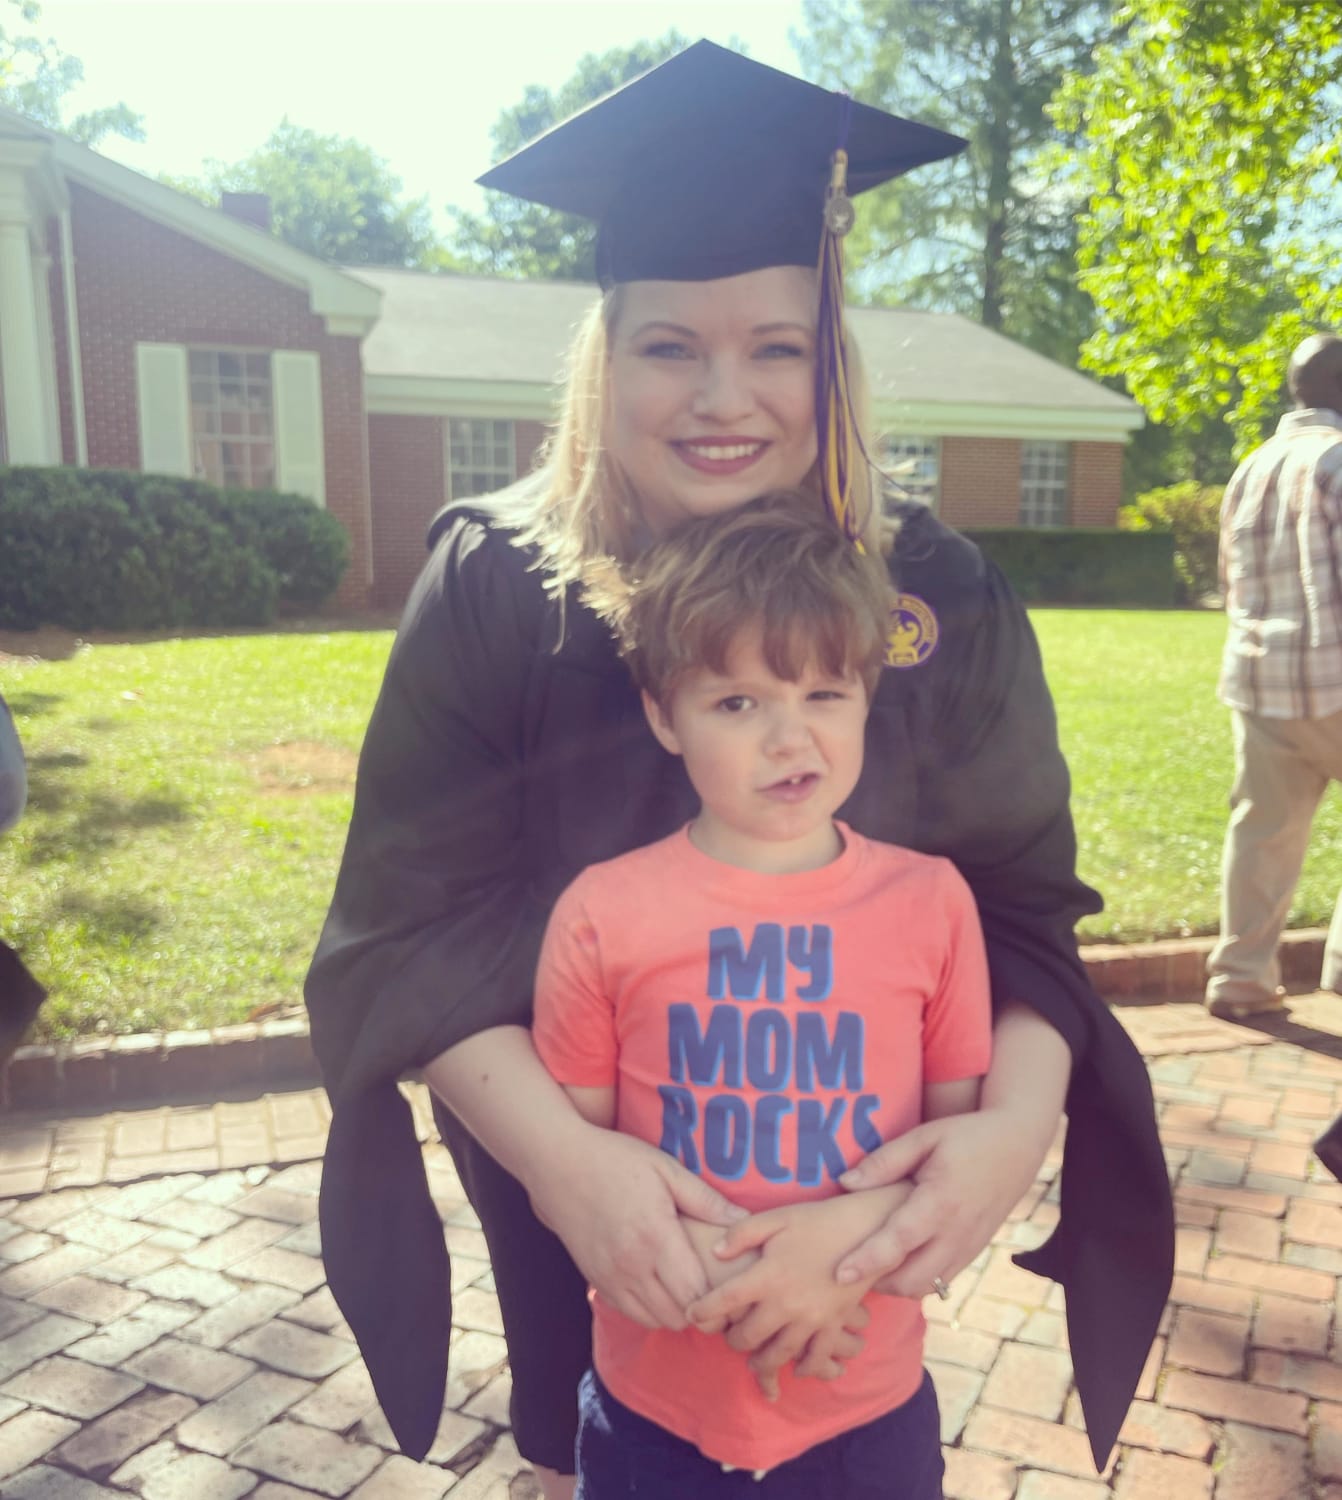 15 years ago, I almost didn’t graduate from high school. Today, I finished my Master’s degree. This little dude is my “why.”